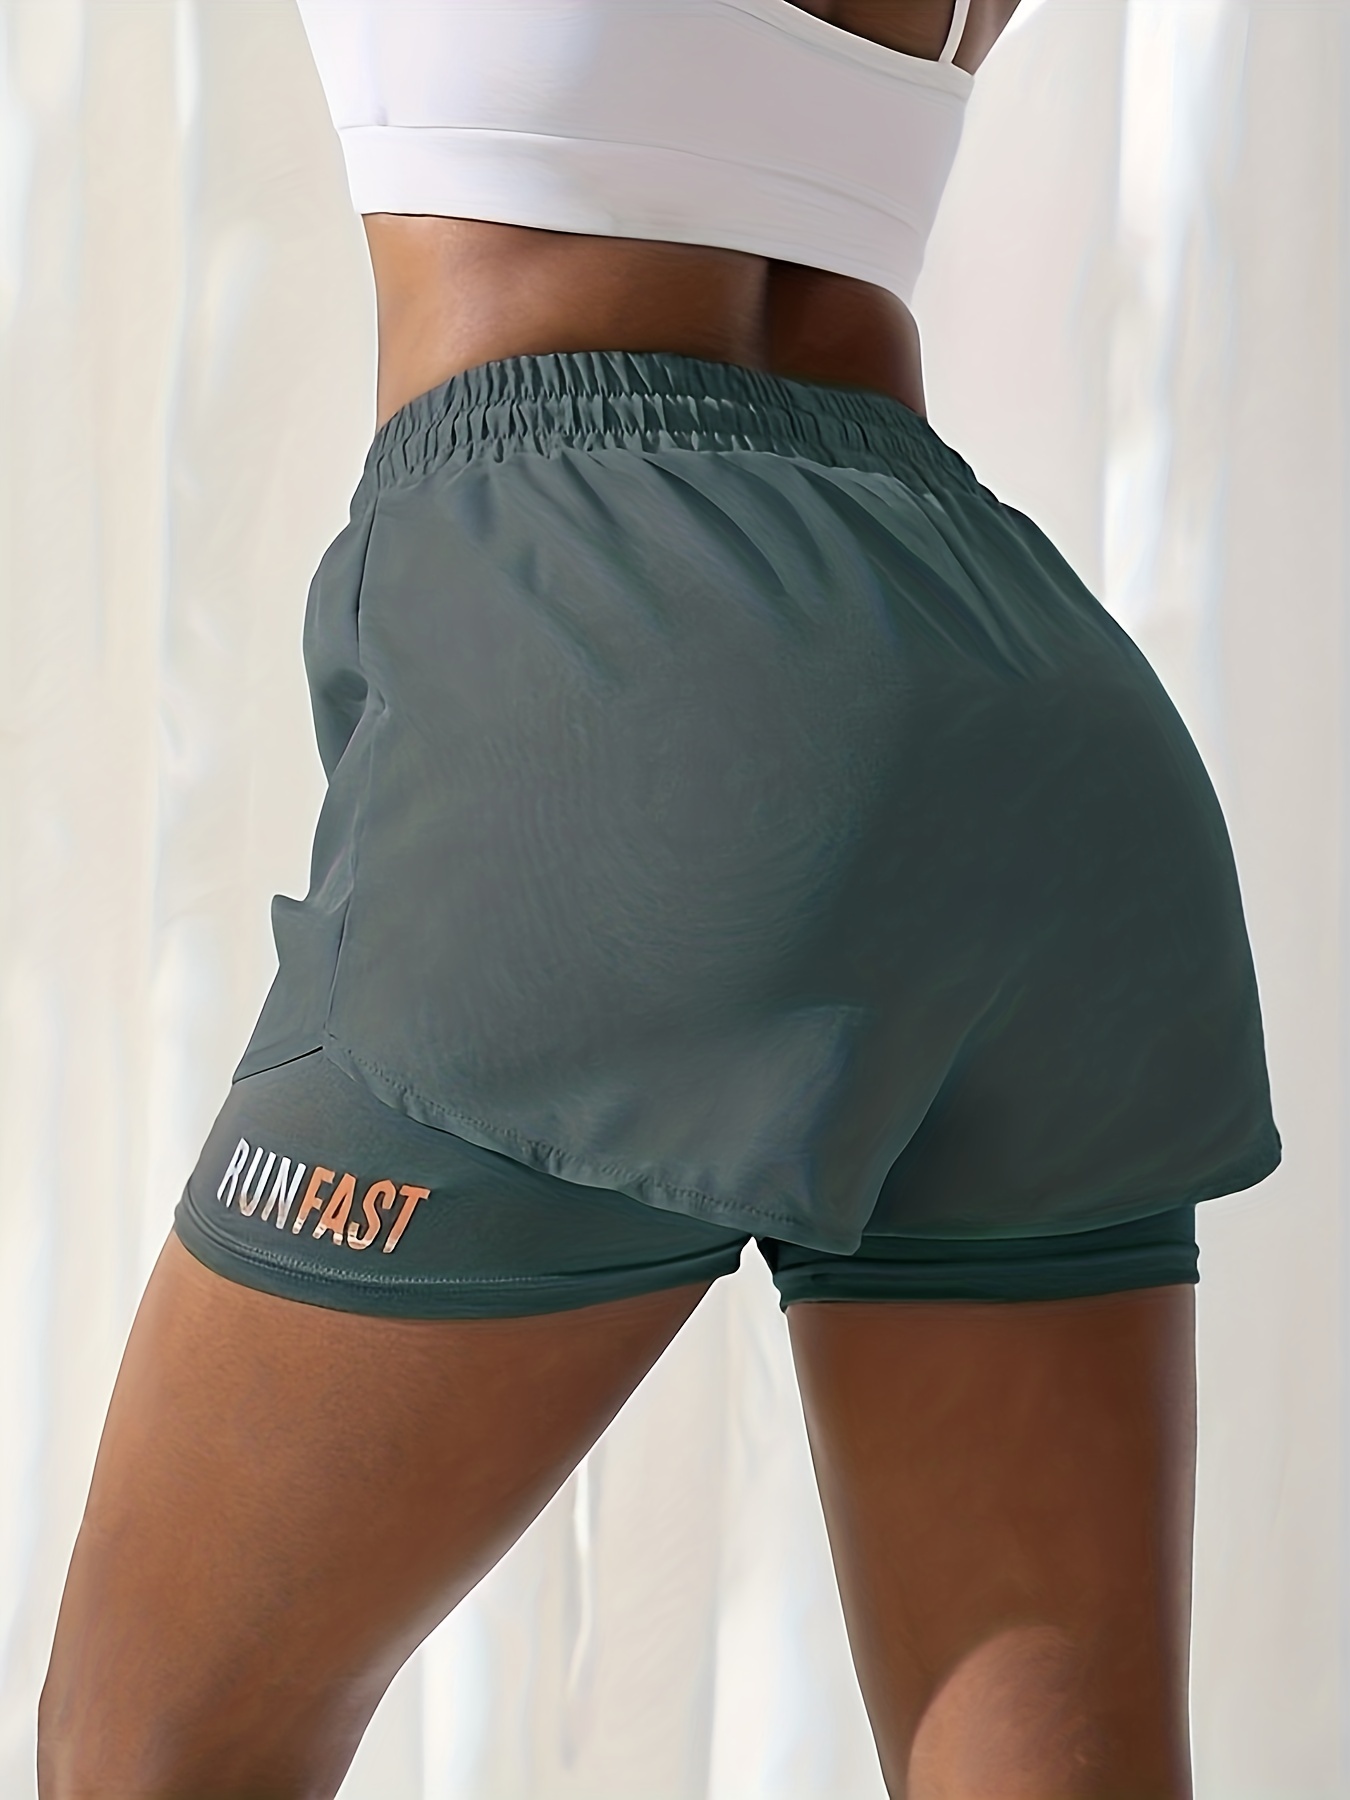 2 in 1 Shorts Women's Athletic Running Shorts for Women Quick-Dry